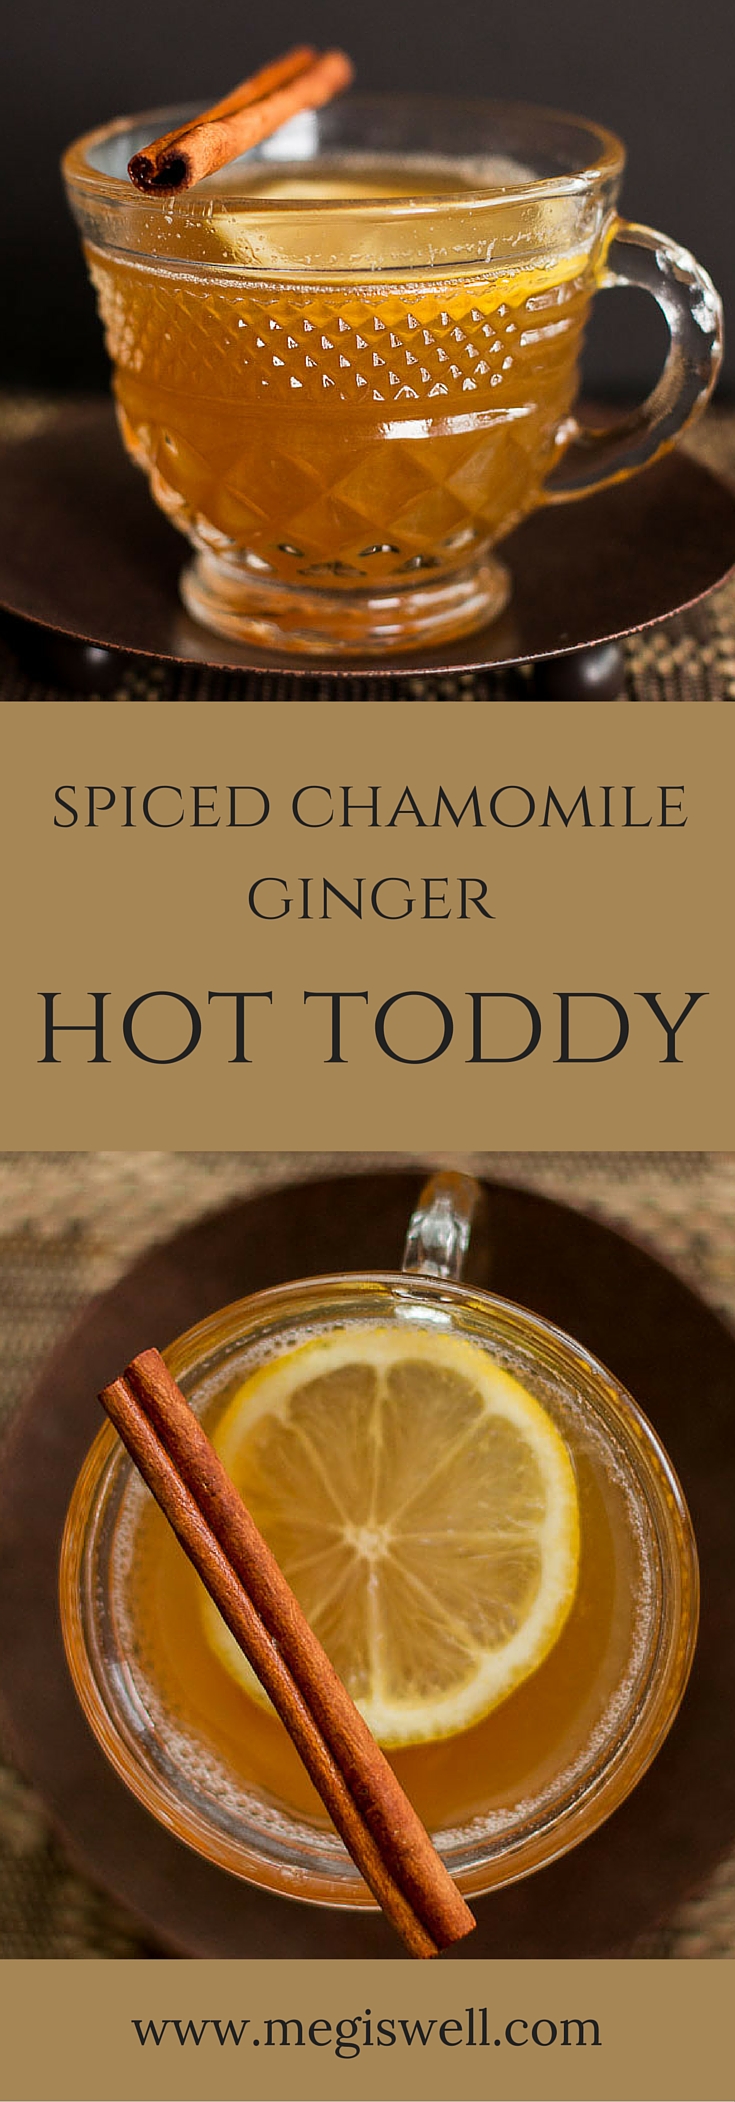 This Spiced Chamomile Ginger Hot Toddy has all the ingredients to make you feel better and satisfy your taste buds. | www.megiswell.com